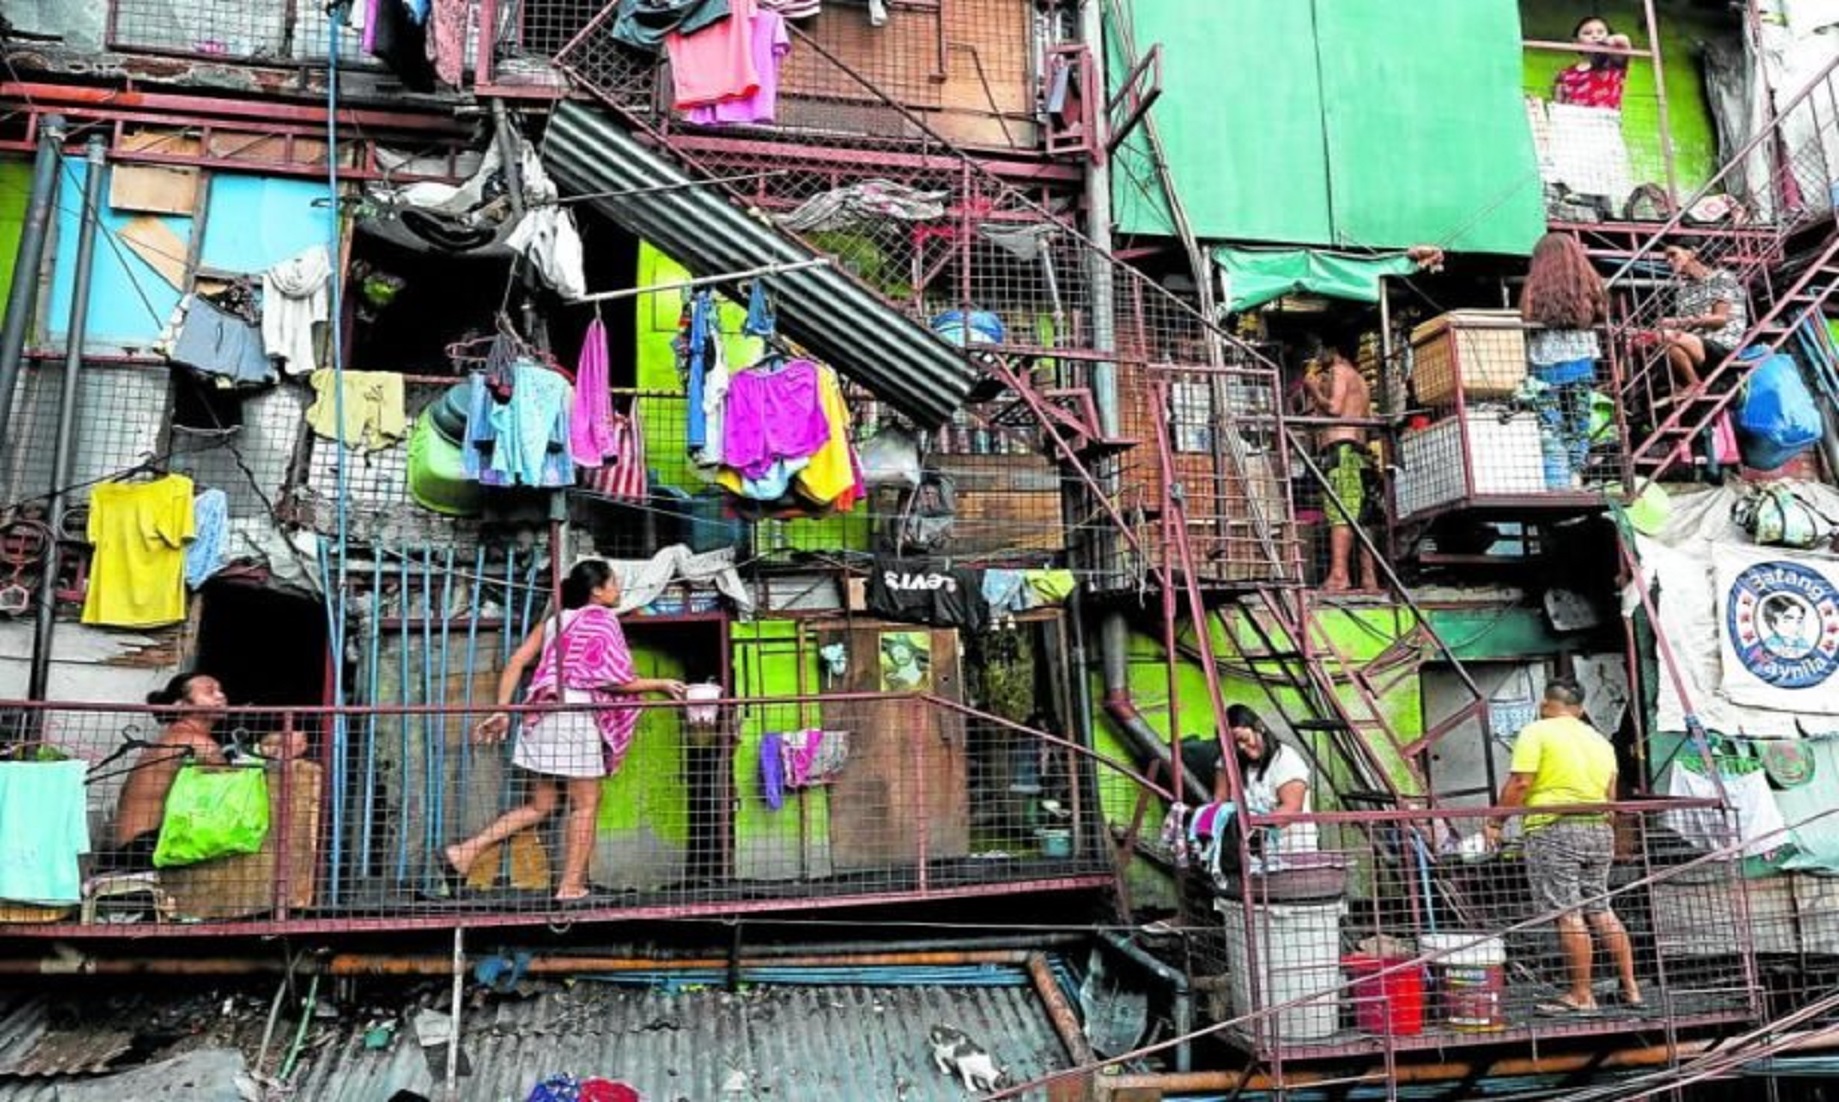 Poverty Incidence In Philippines Up To 23.7 Percent In First Half Of 2021